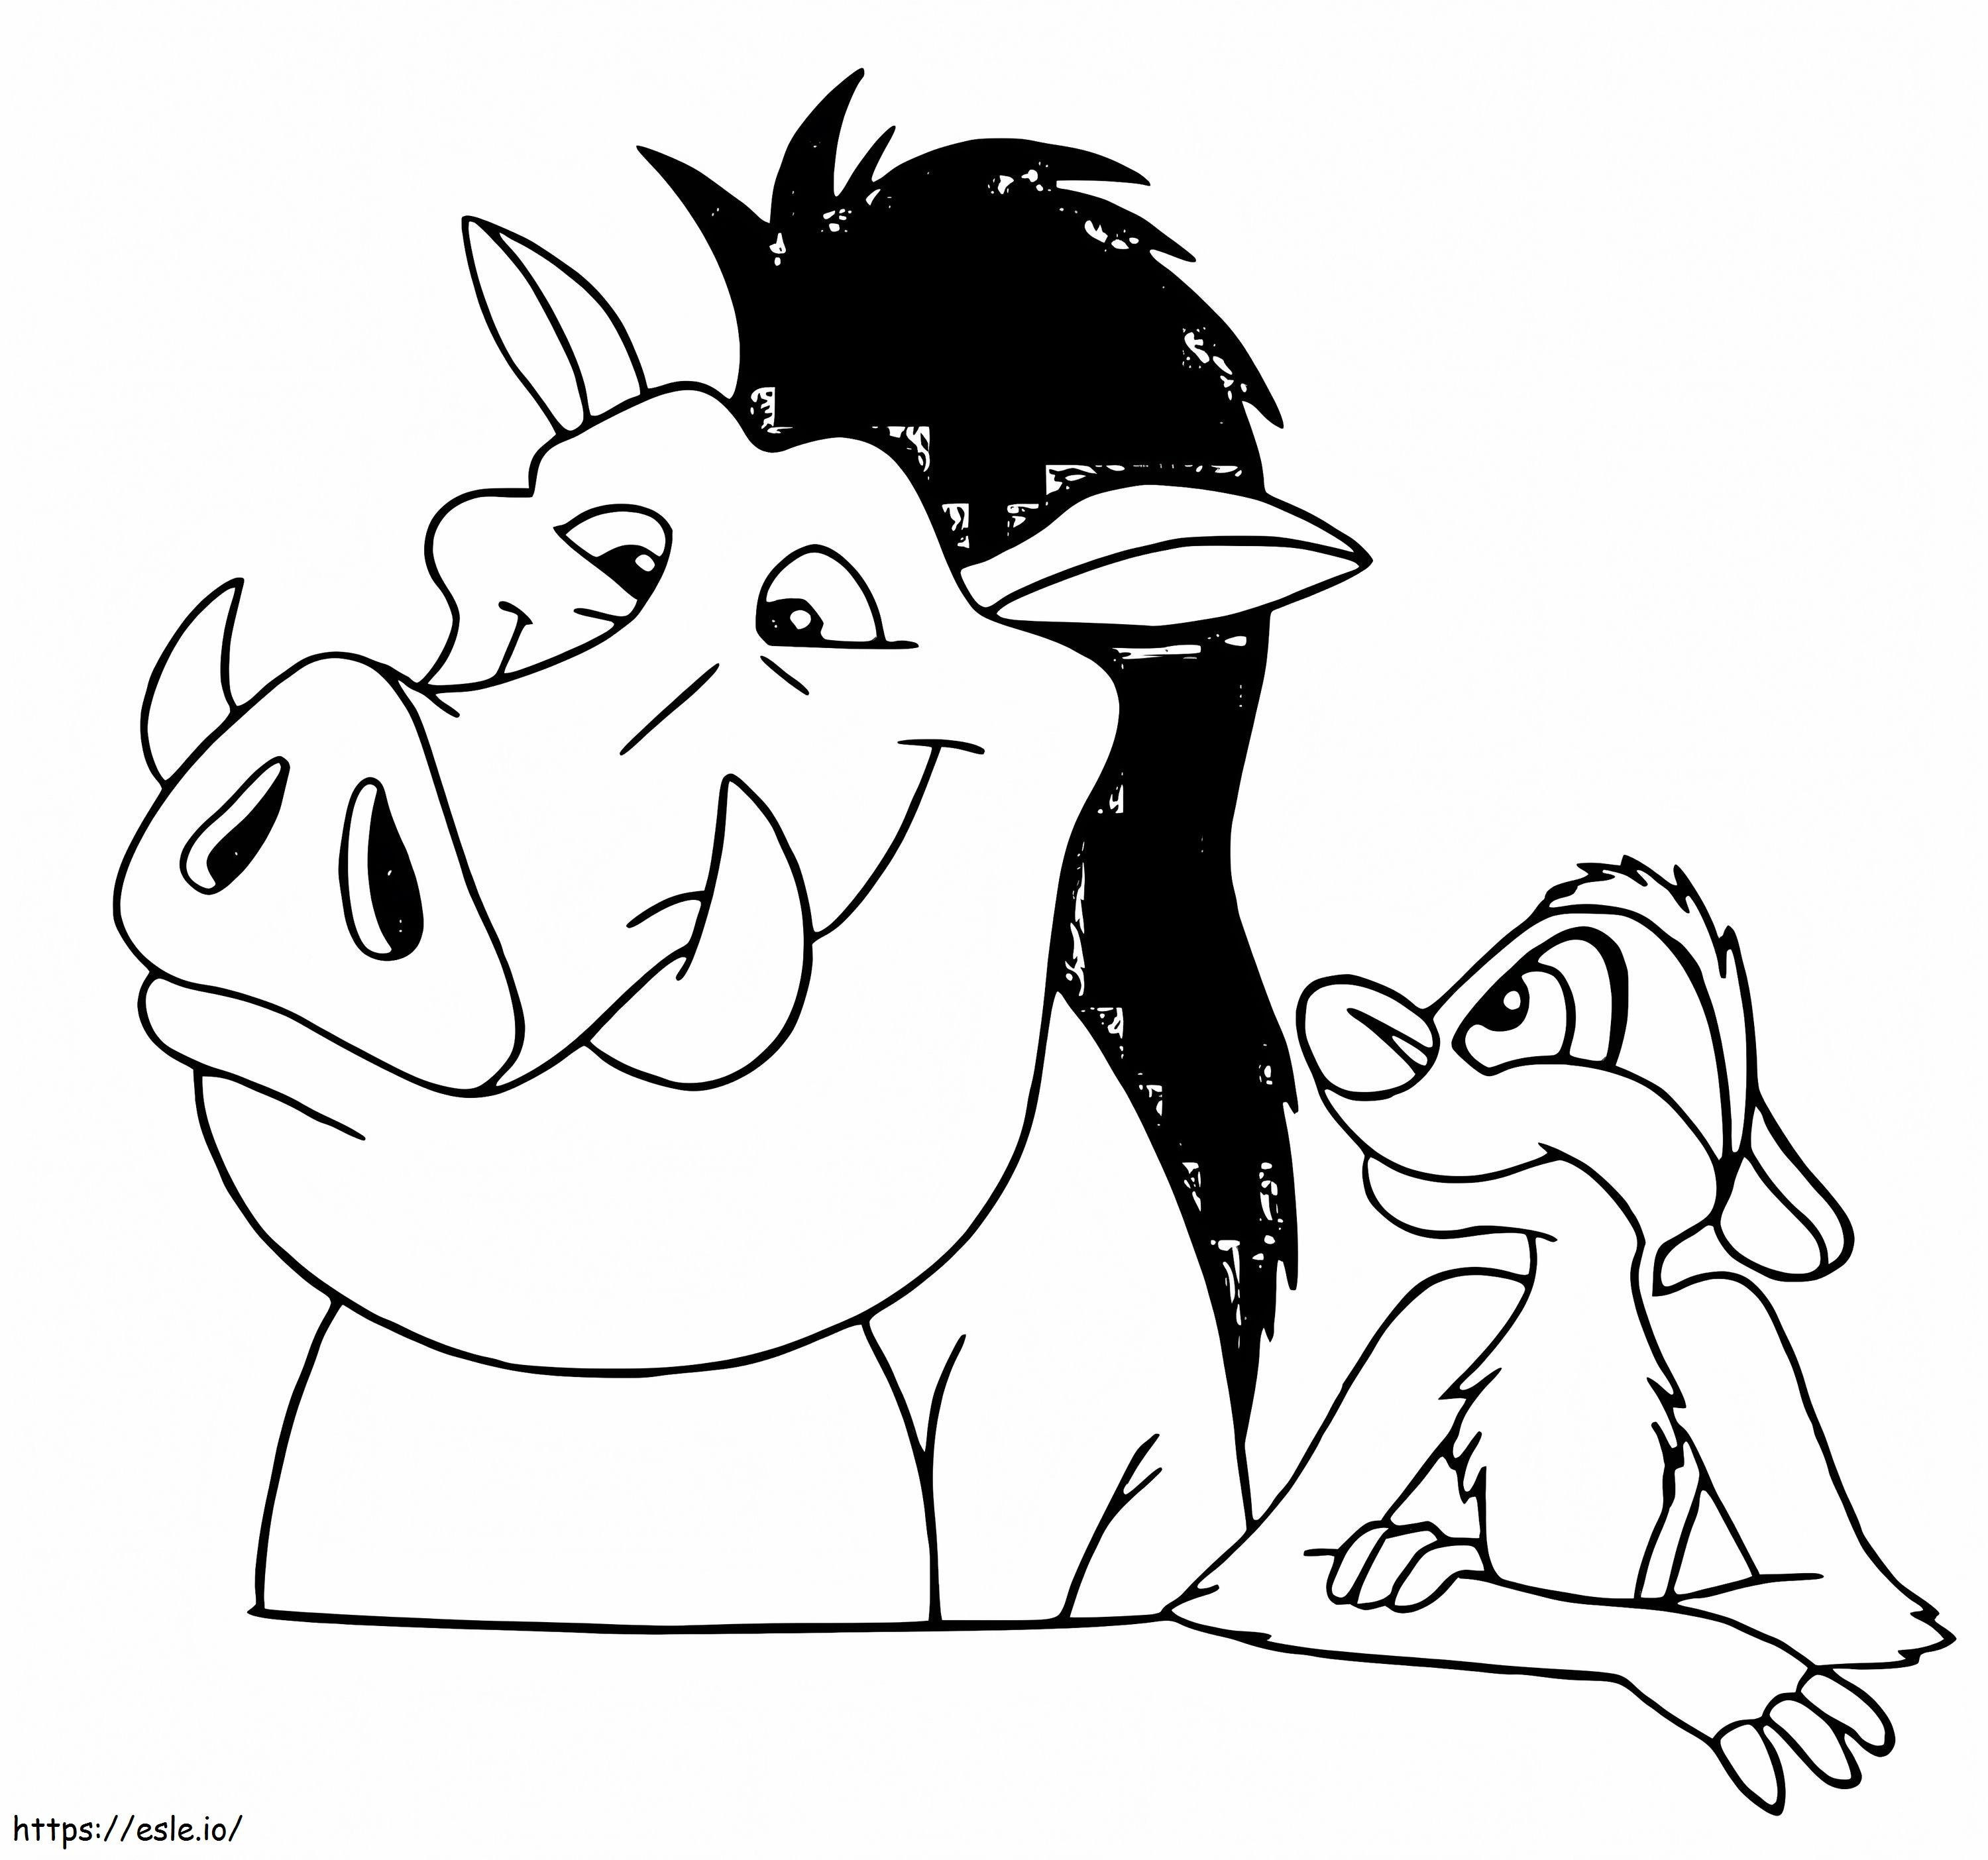 Timon With Pumbaa coloring page